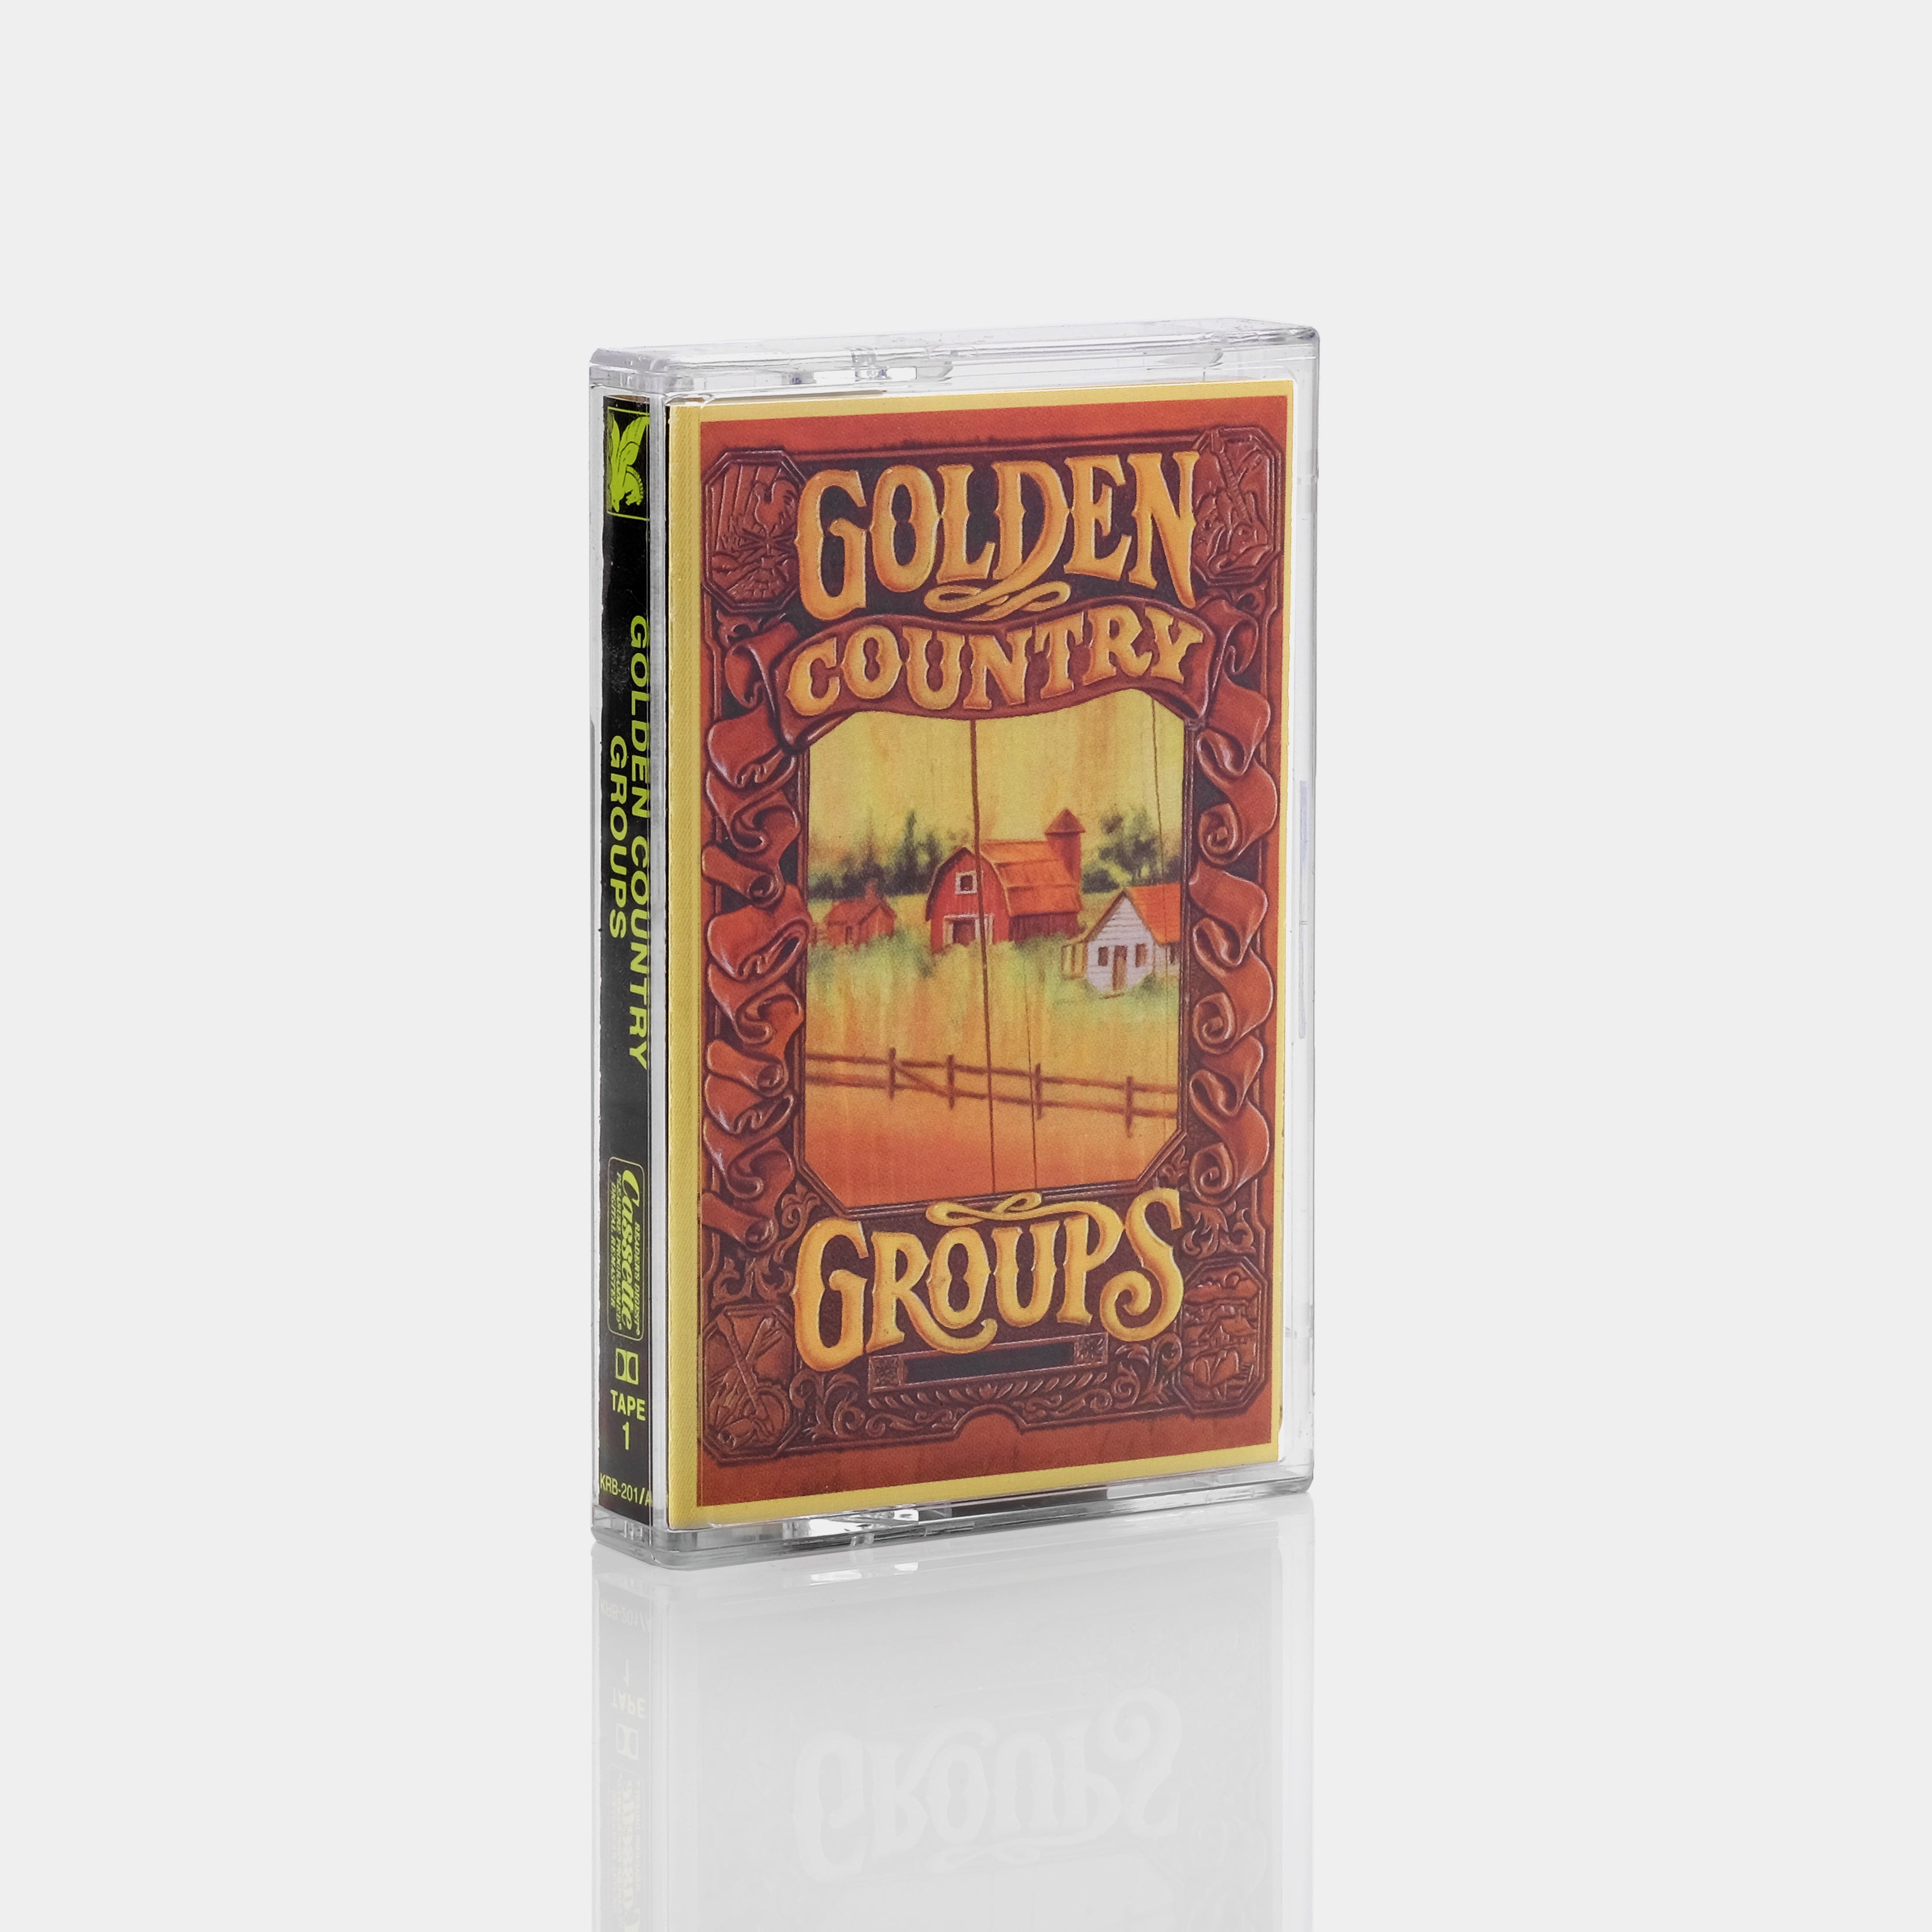 Golden Country Groups (Vol. 2) Cassette Tape